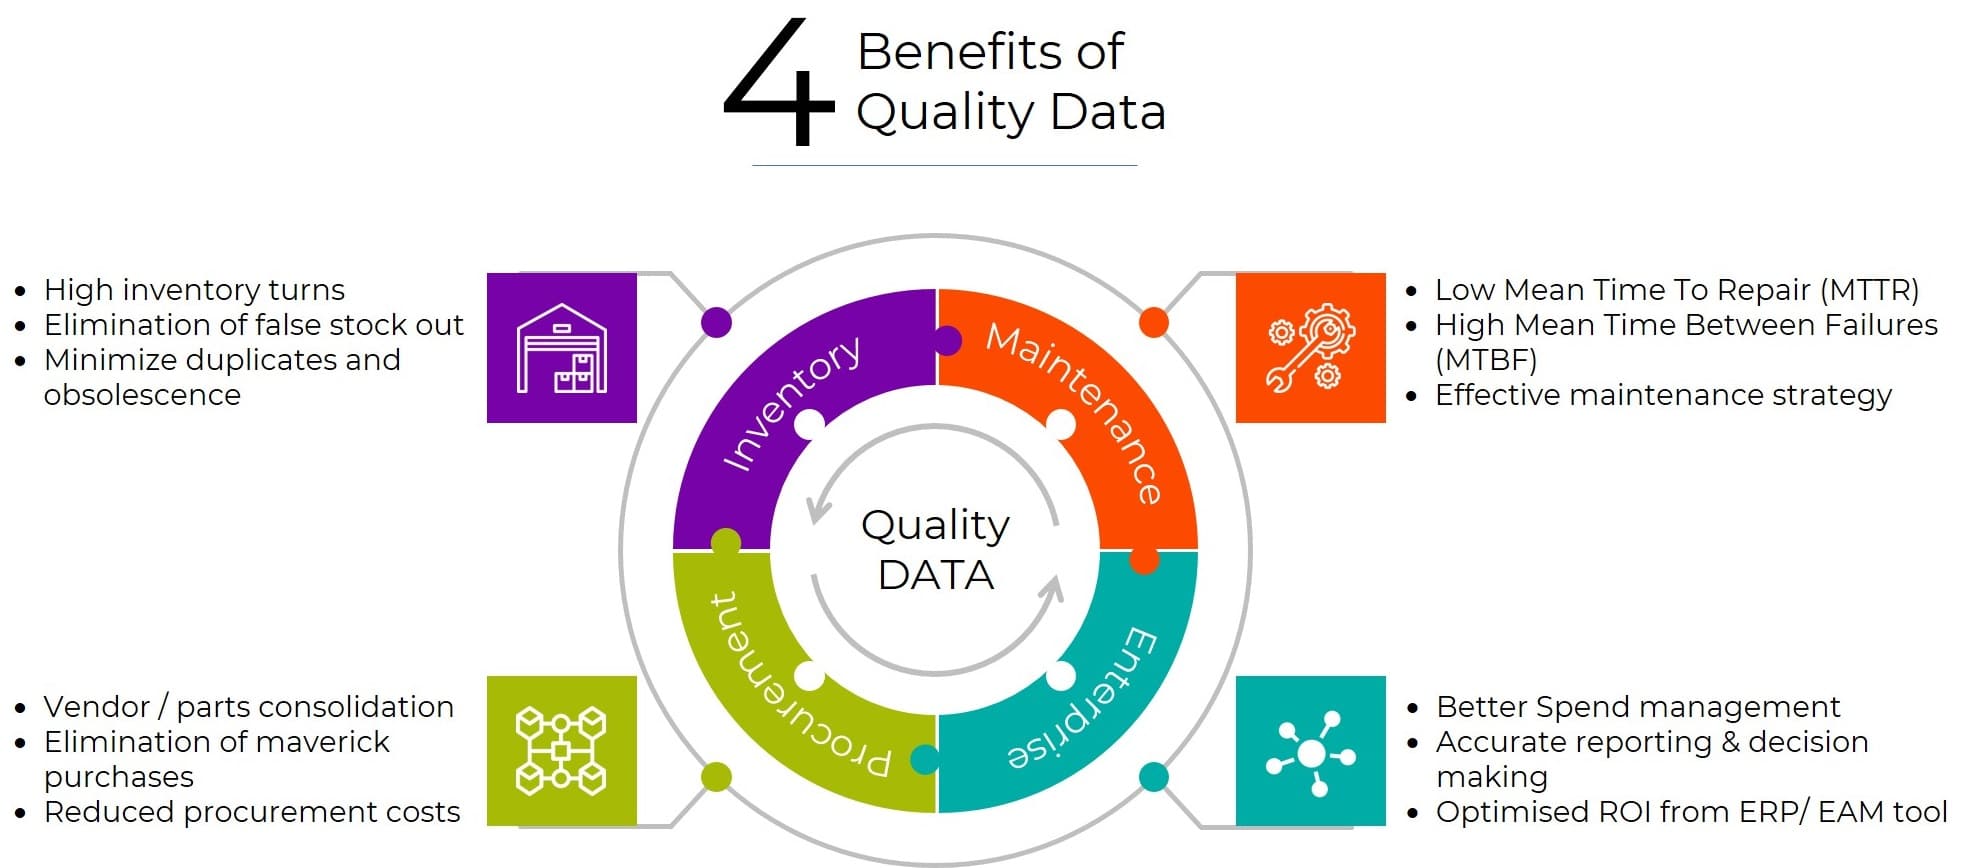 Benefits of Quality Master Data | MRO Solutions